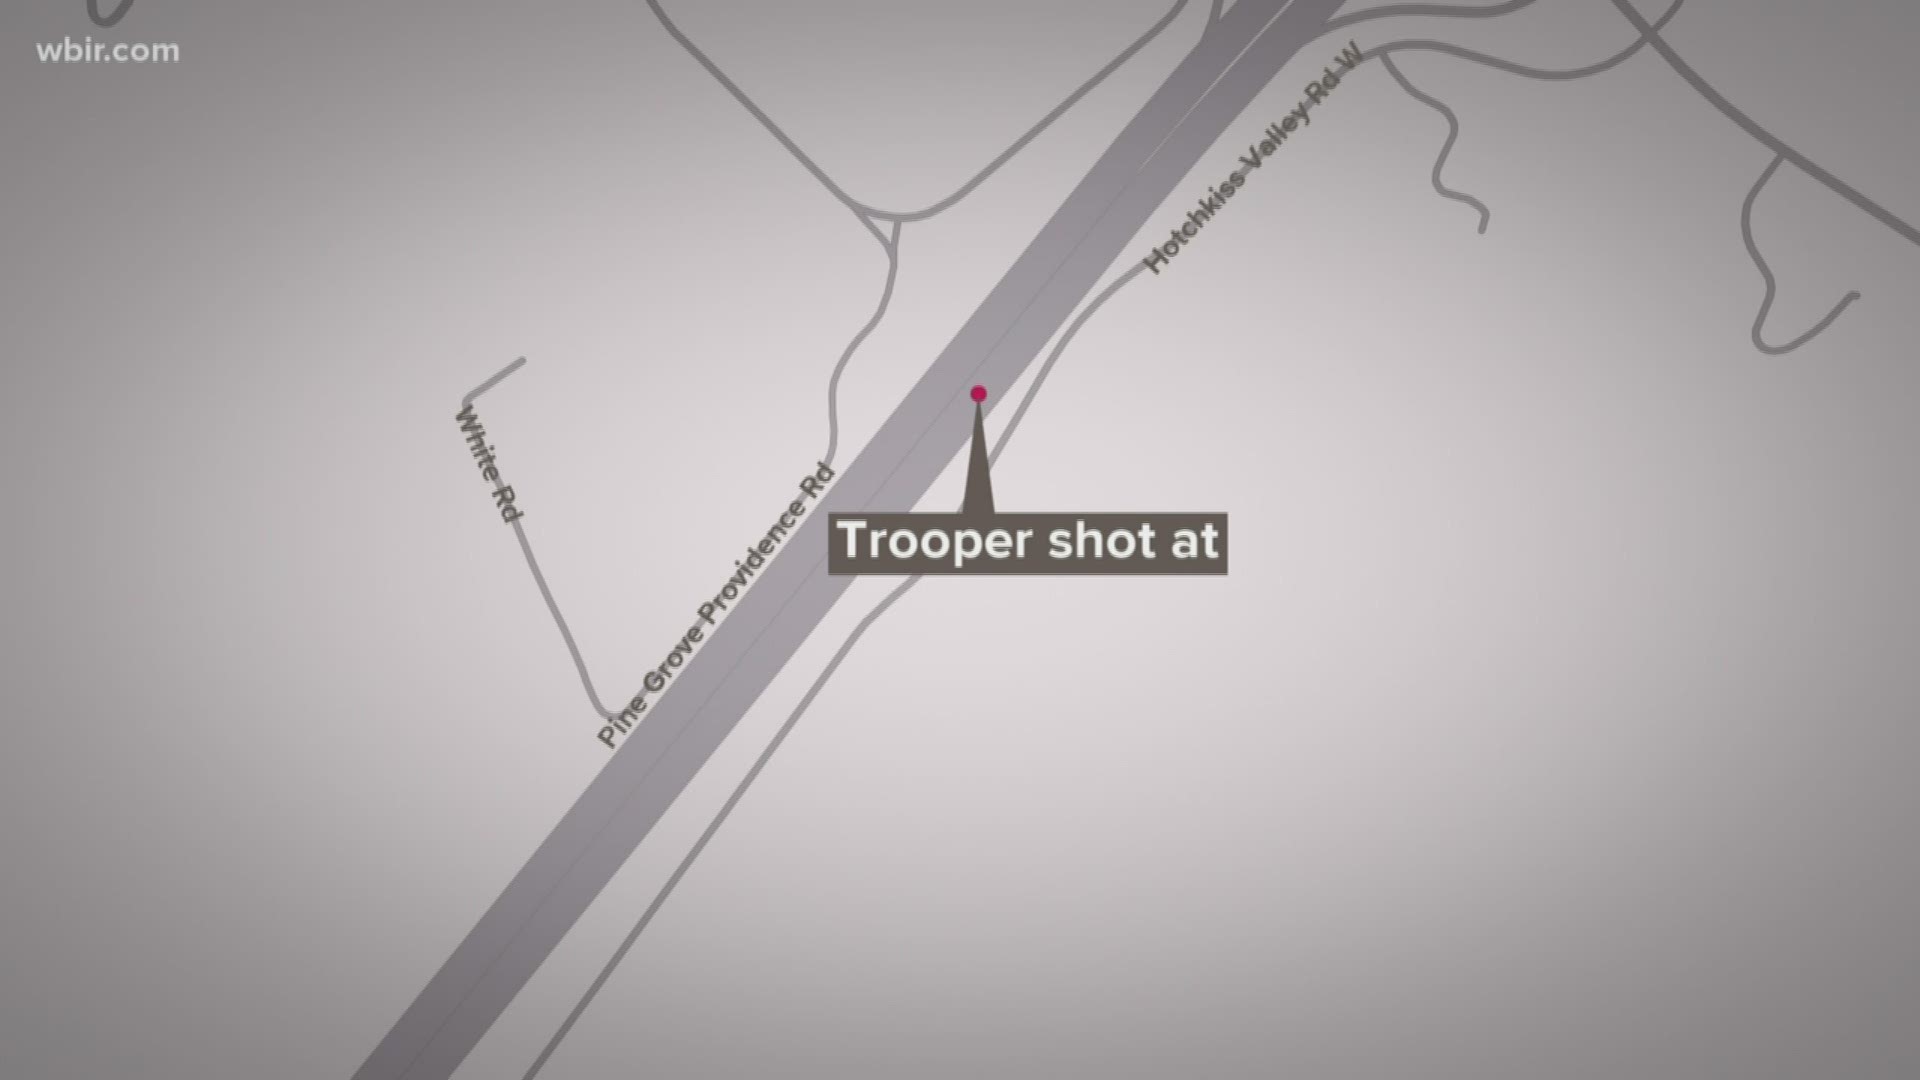 A THP spokesperson said the trooper was performing a traffic stop when shots were fired from a passing vehicle. The trooper gave chase and arrested two people.